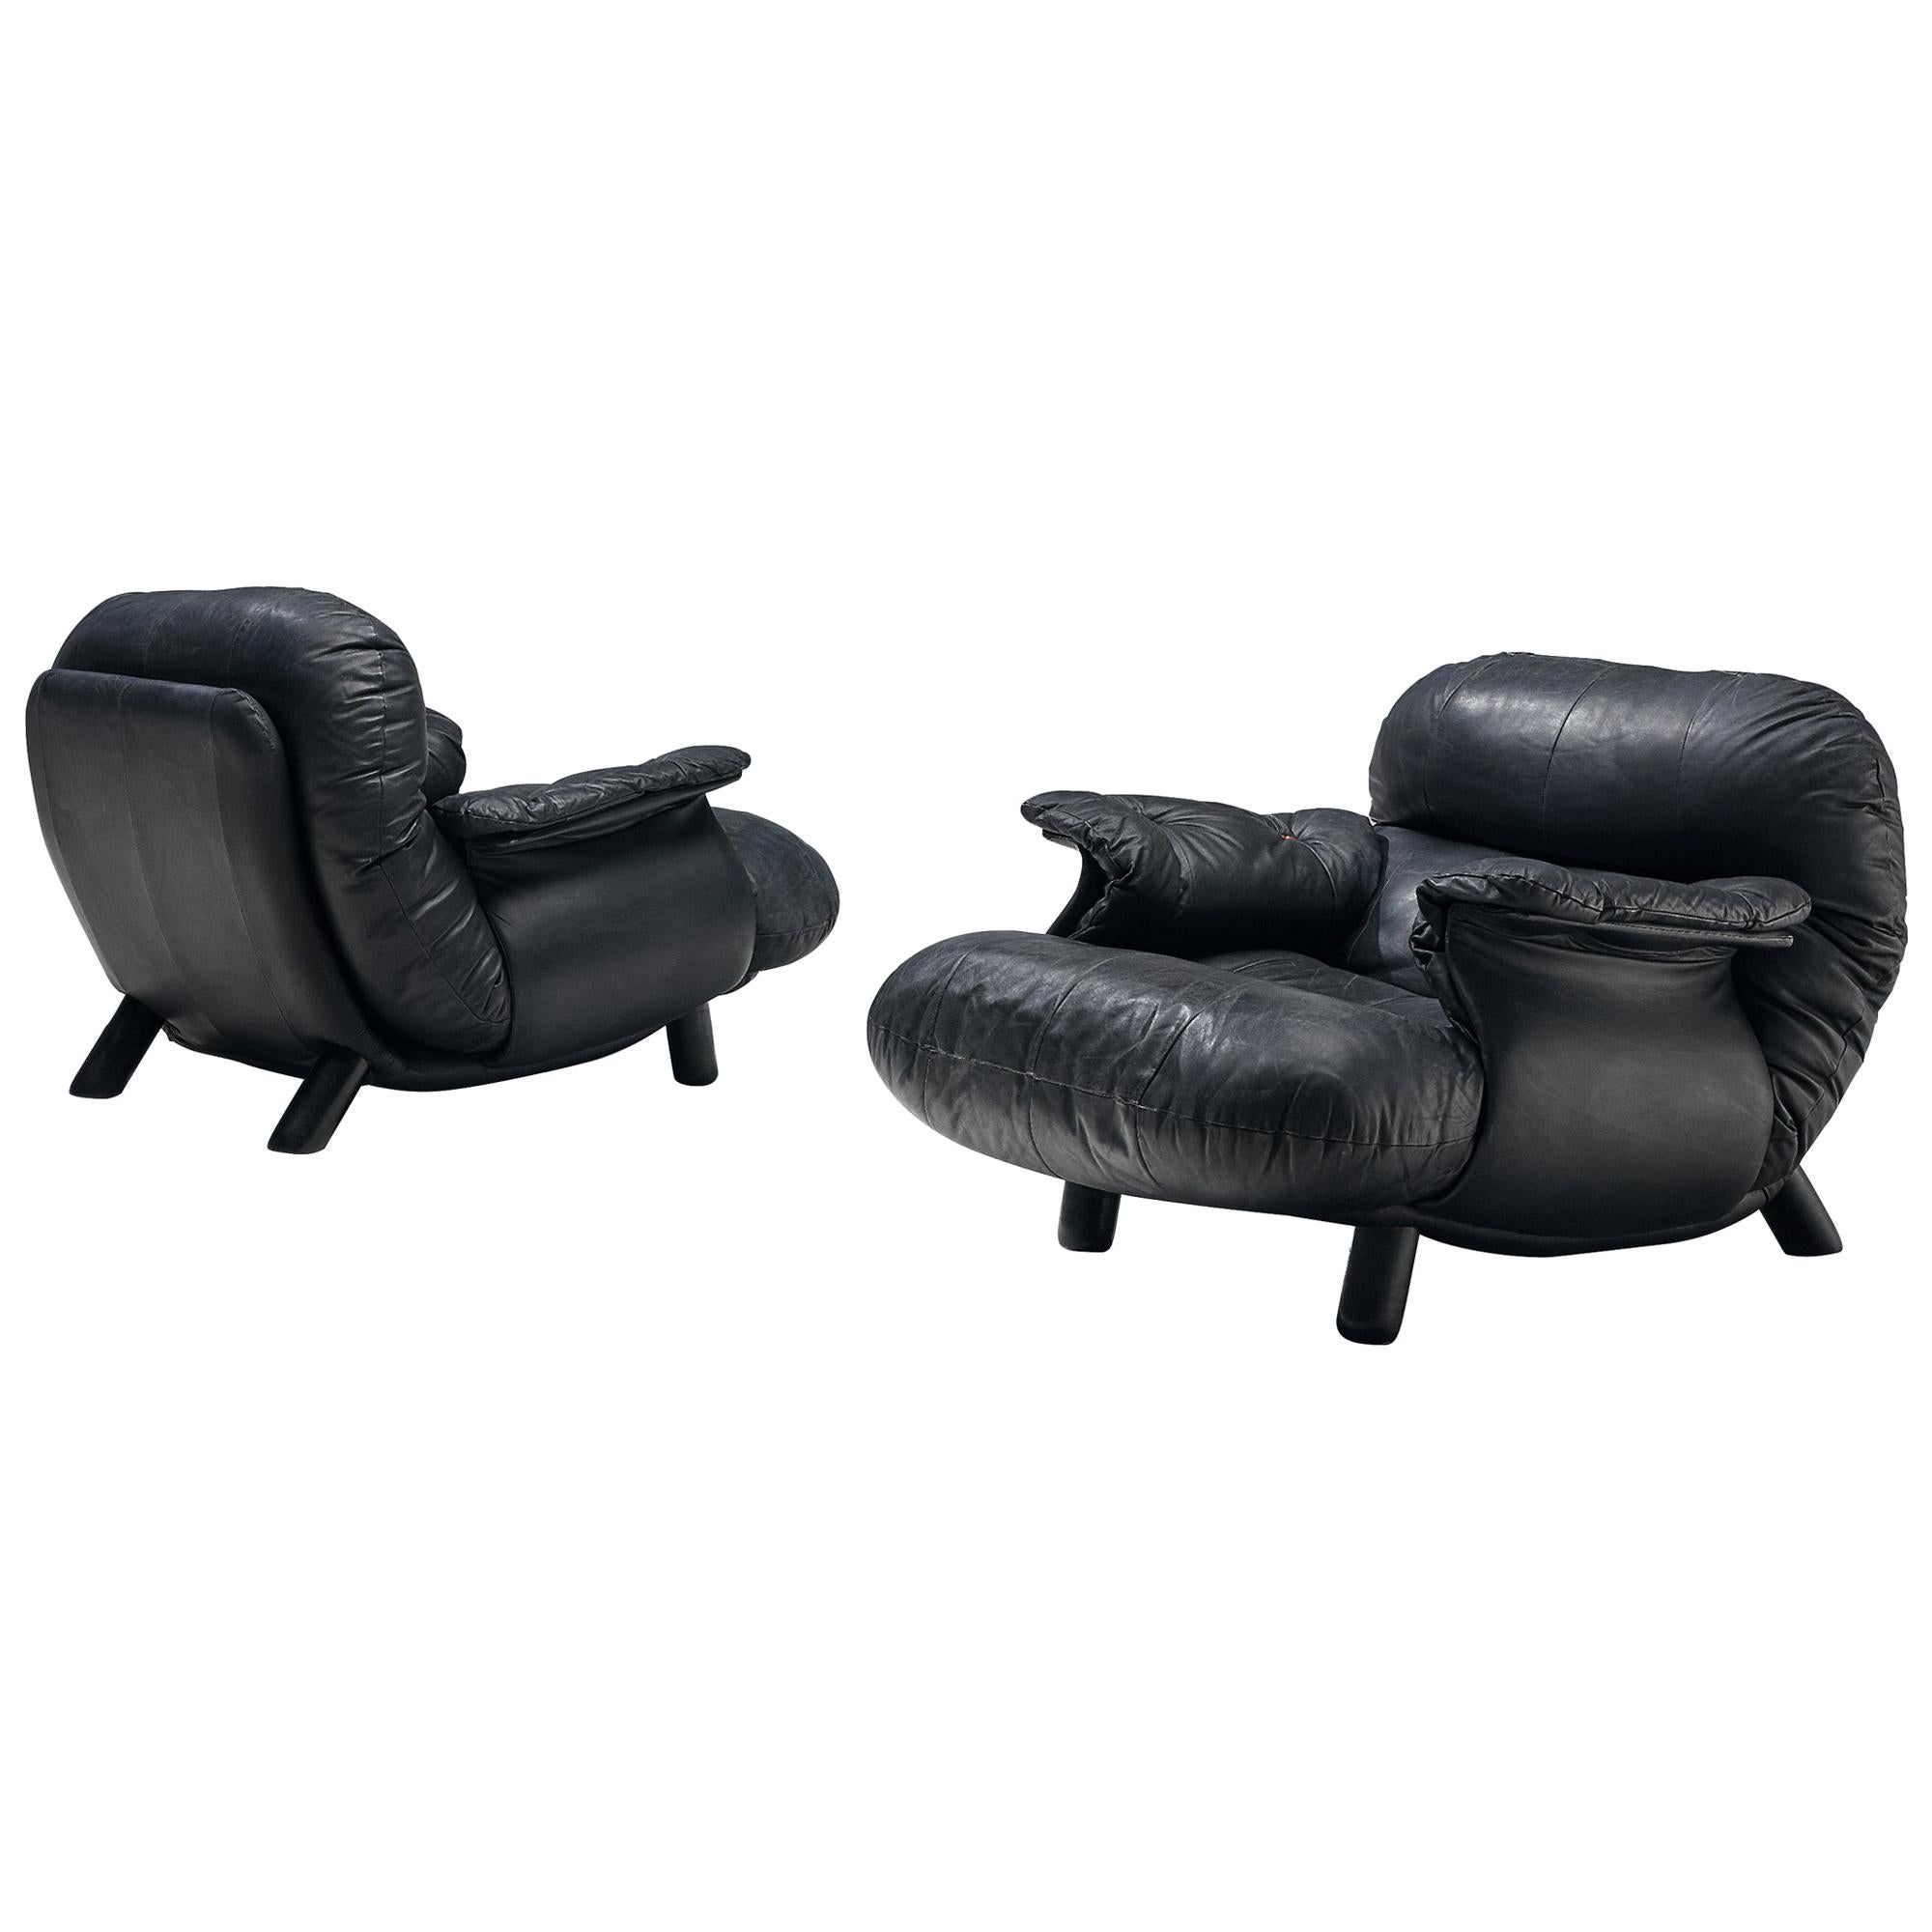 E. Cobianchi Lounge Chairs in Black Leather